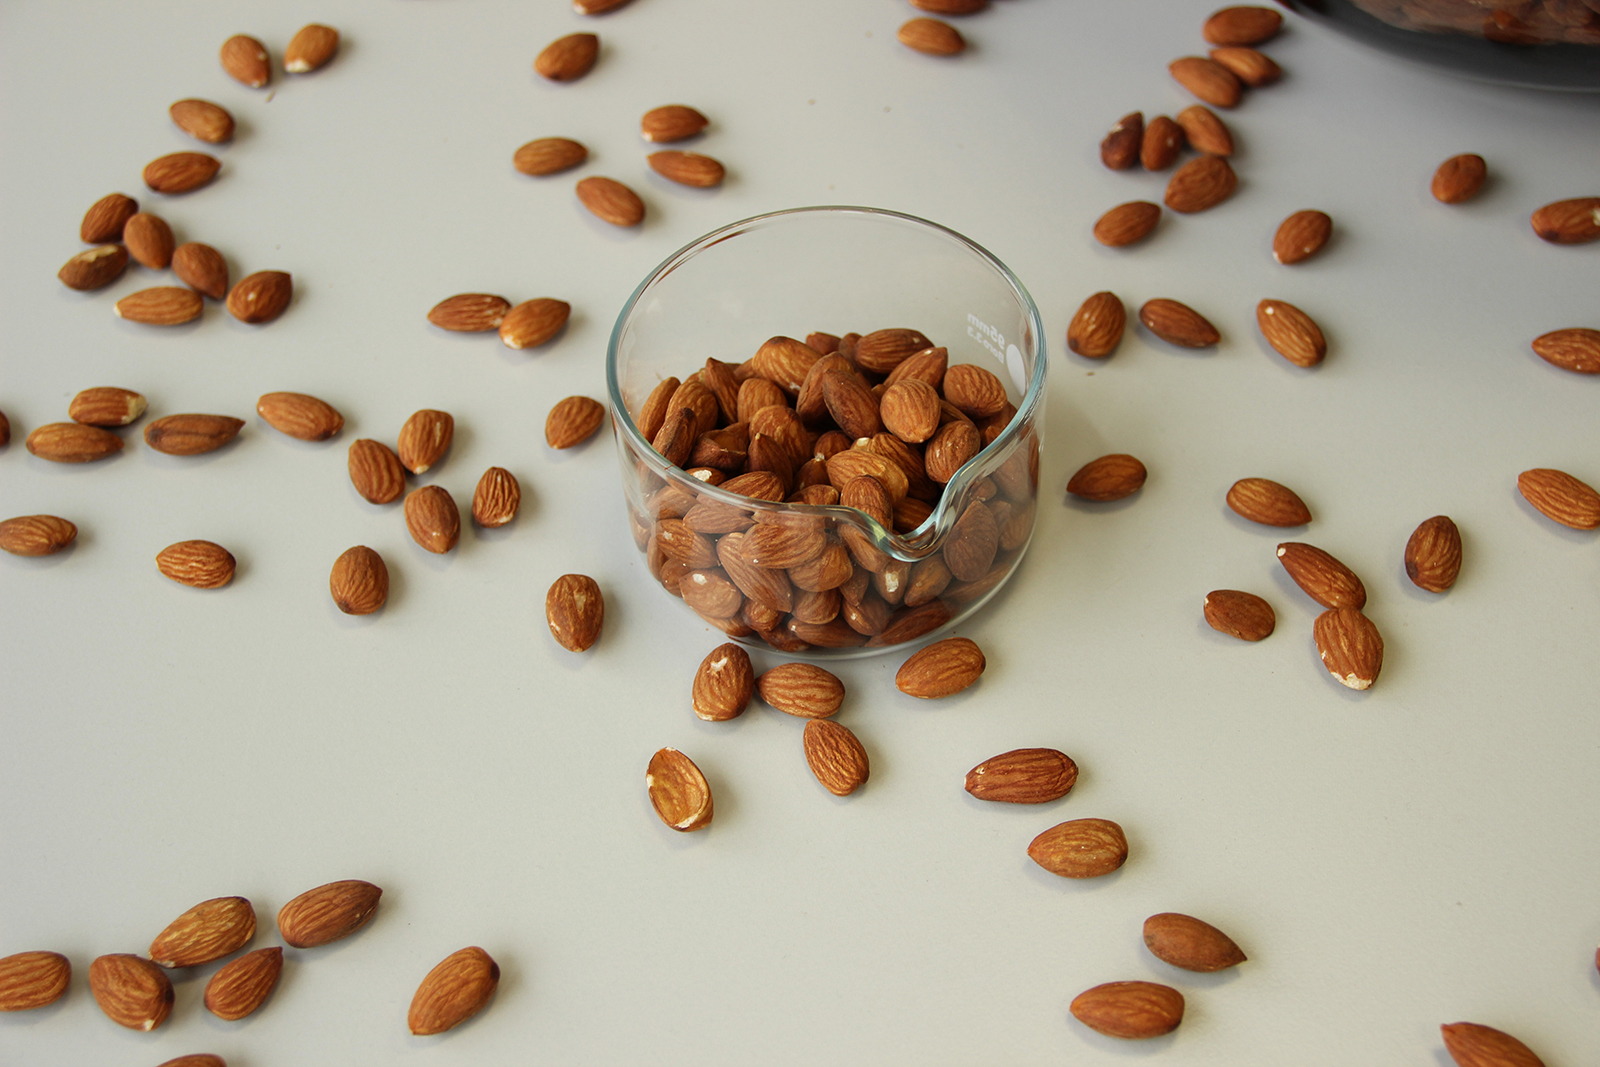 Almonds contaminated with salmonella can cause food poisoning.